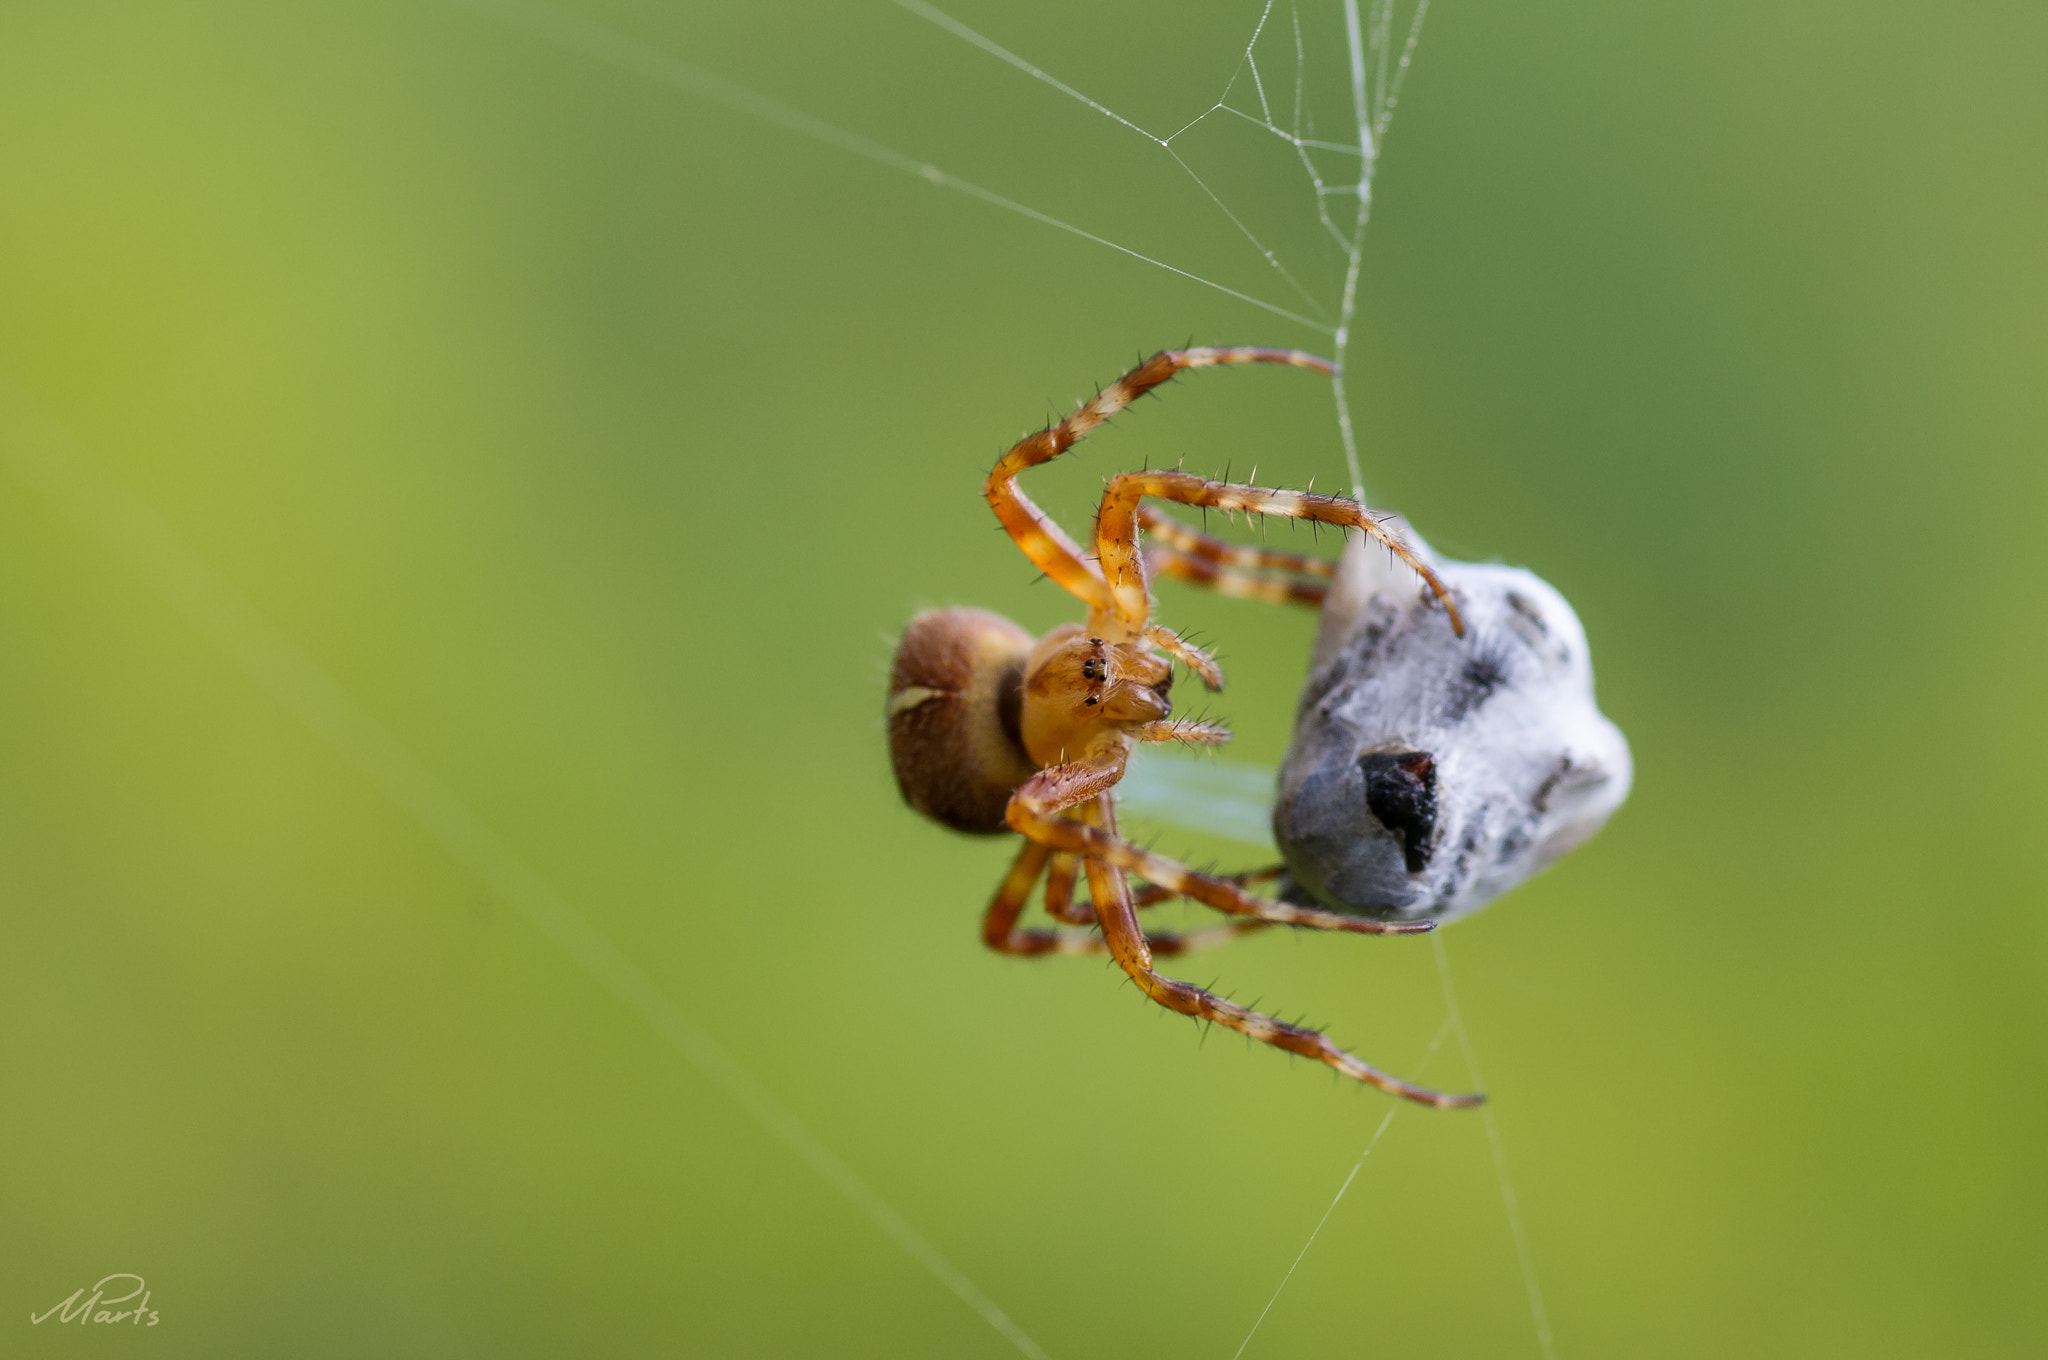 Pentax K-x sample photo. Spider's meal photography